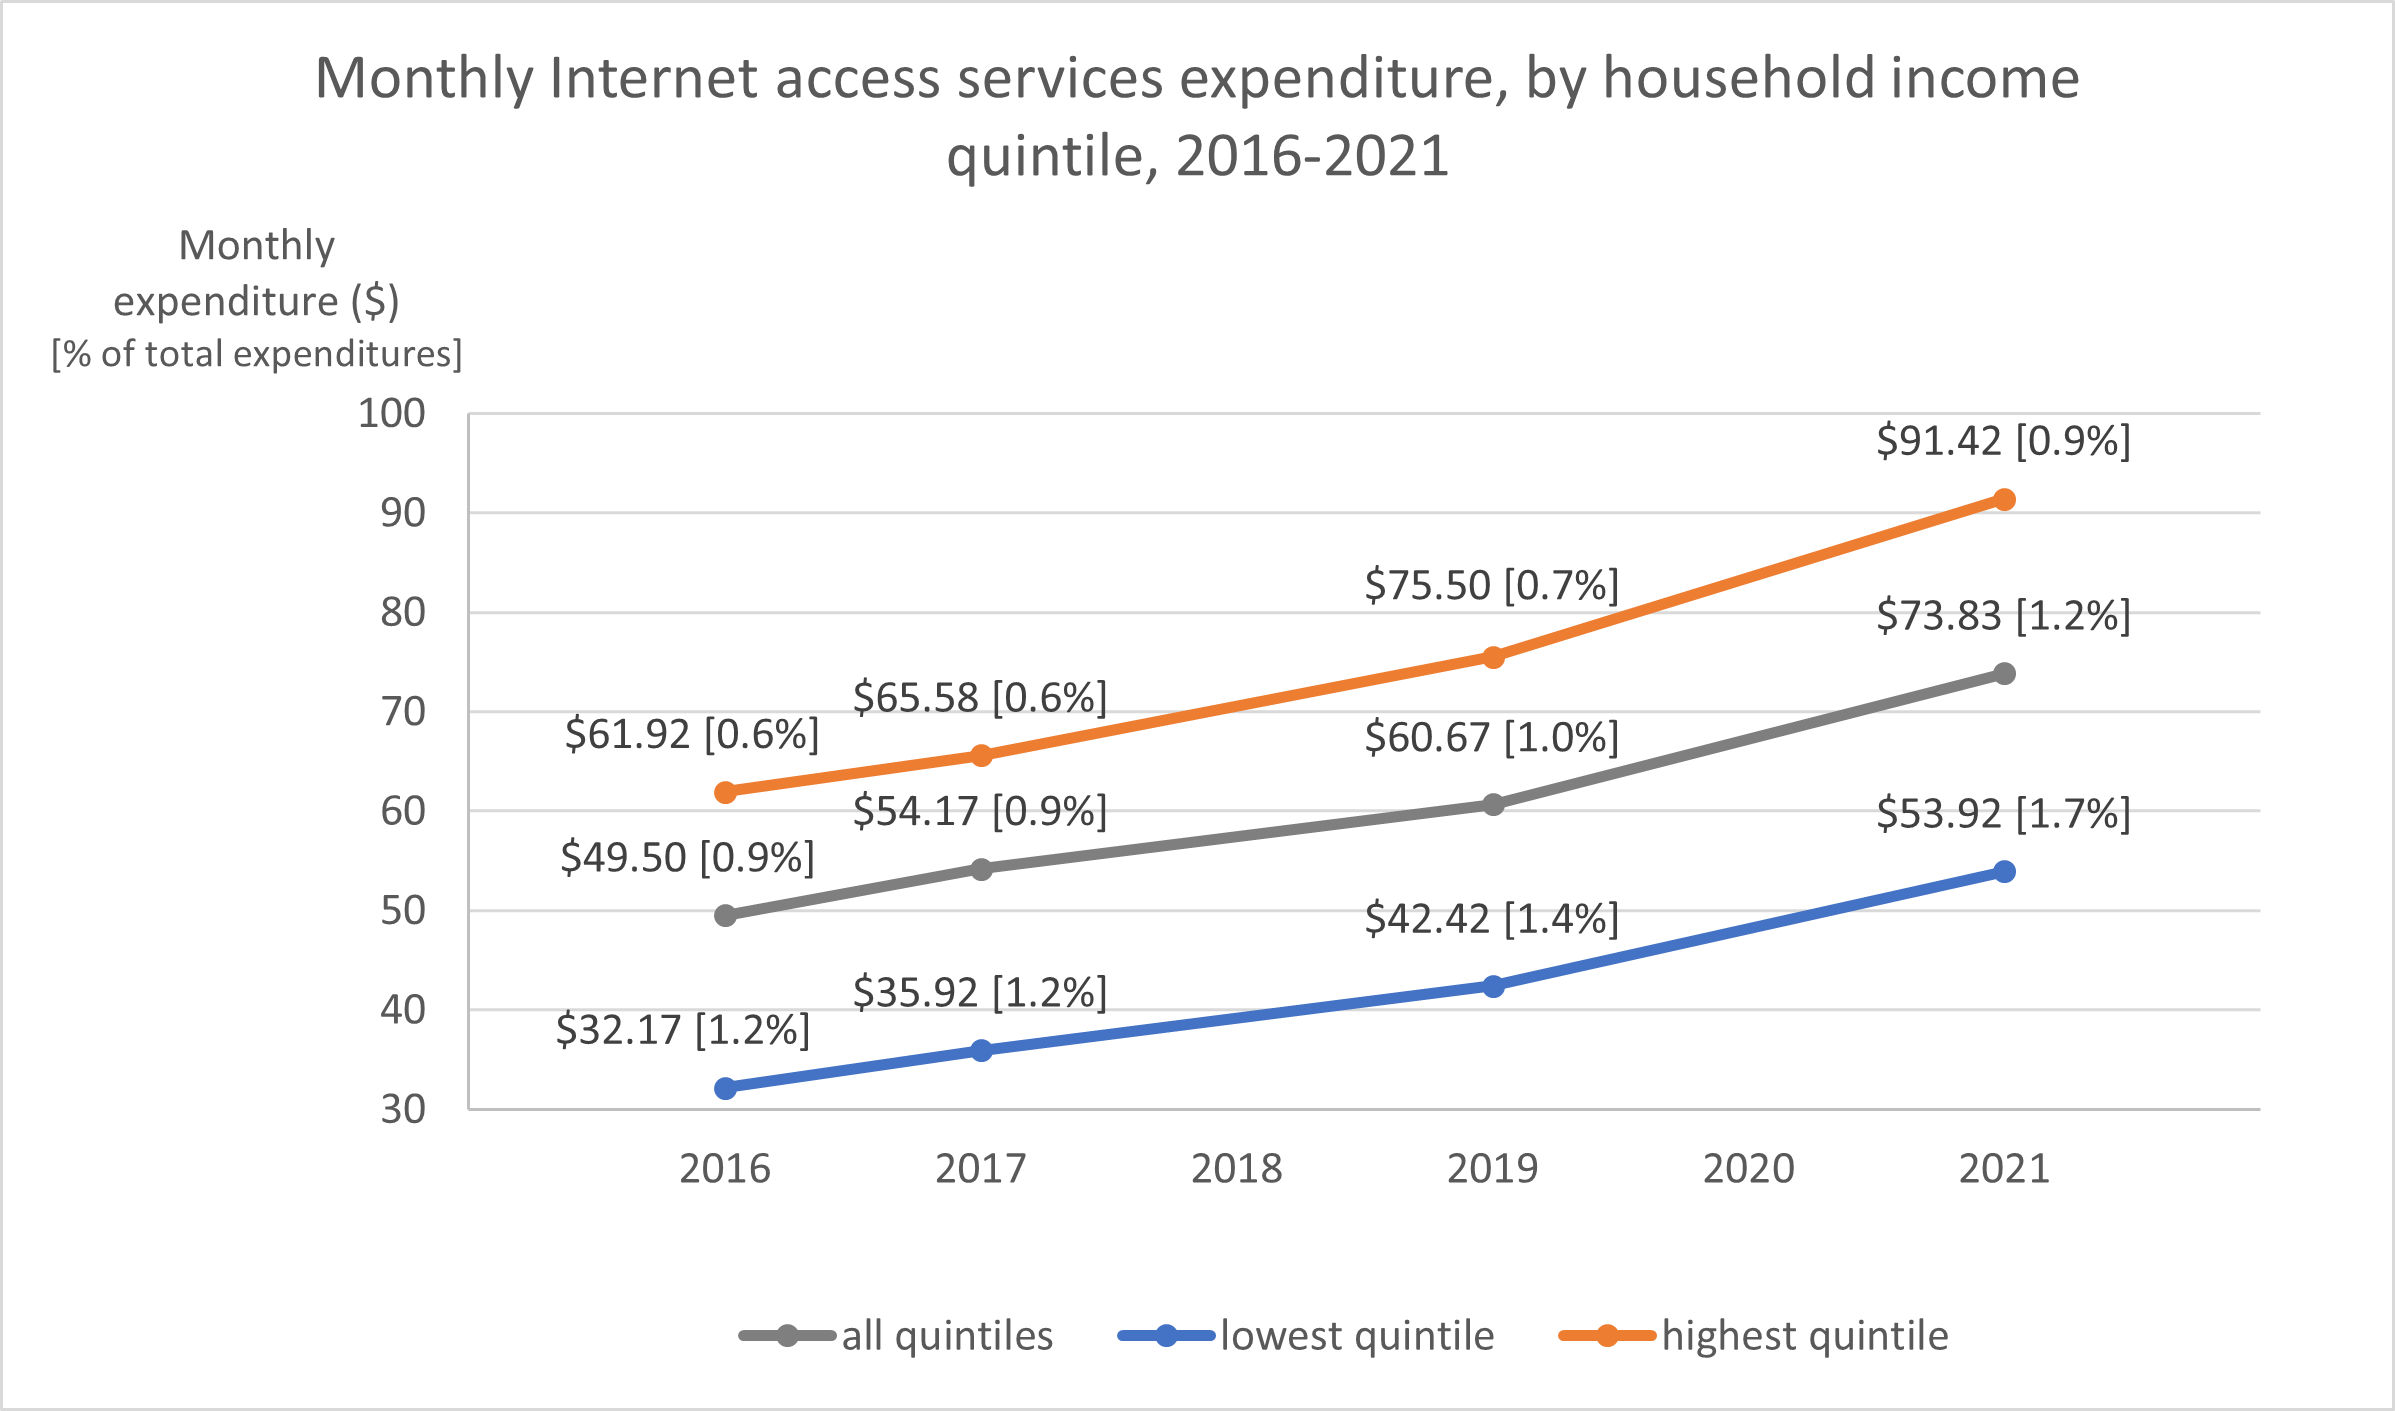 Monthly spending on Internet access services 2016-2021